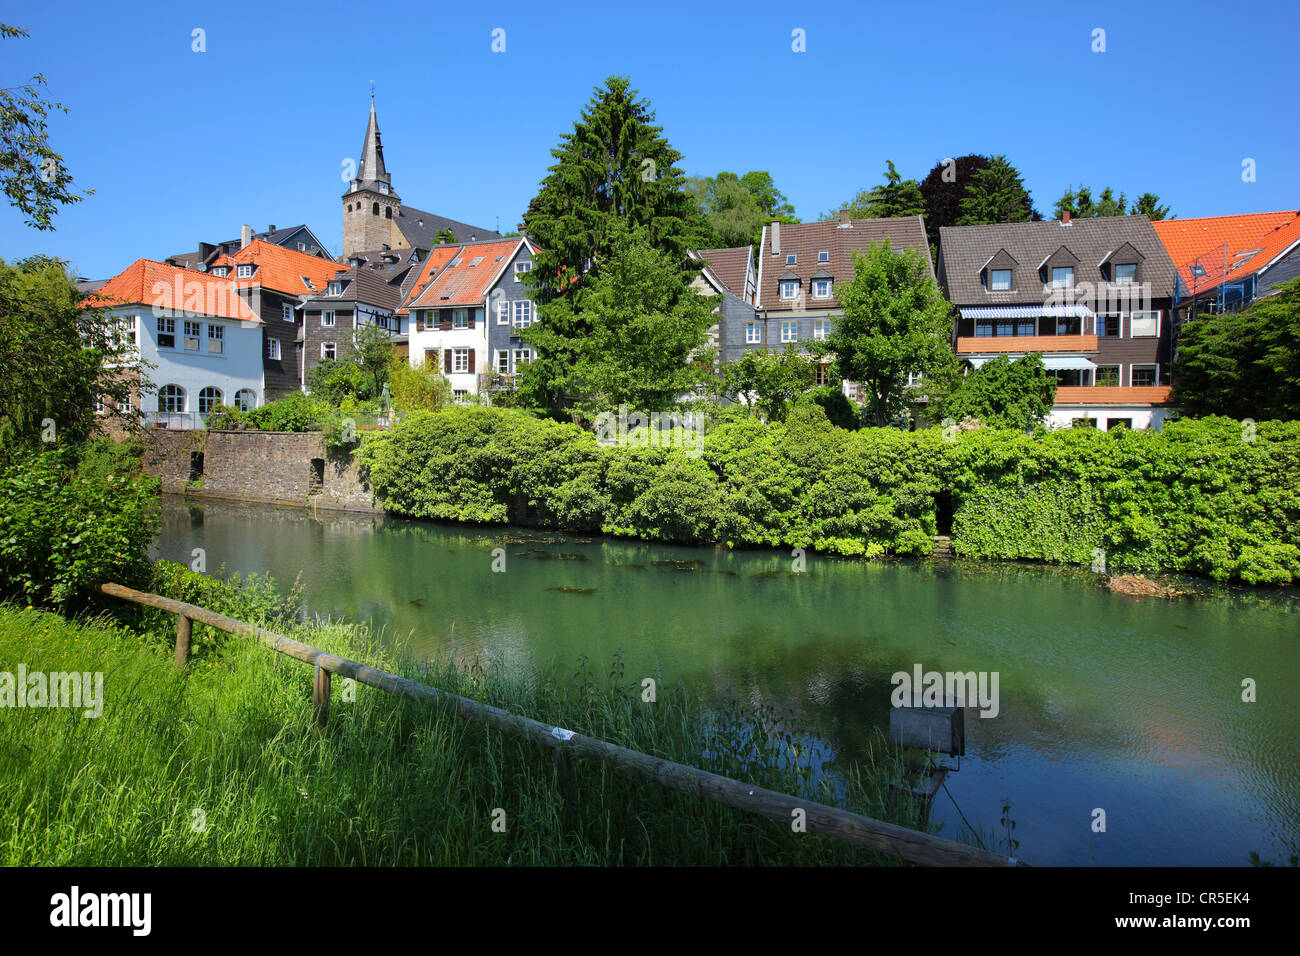 Old town of Kettwig a southern part of the city Essen, at river Ruhr in Germany, Europe. Stock Photo